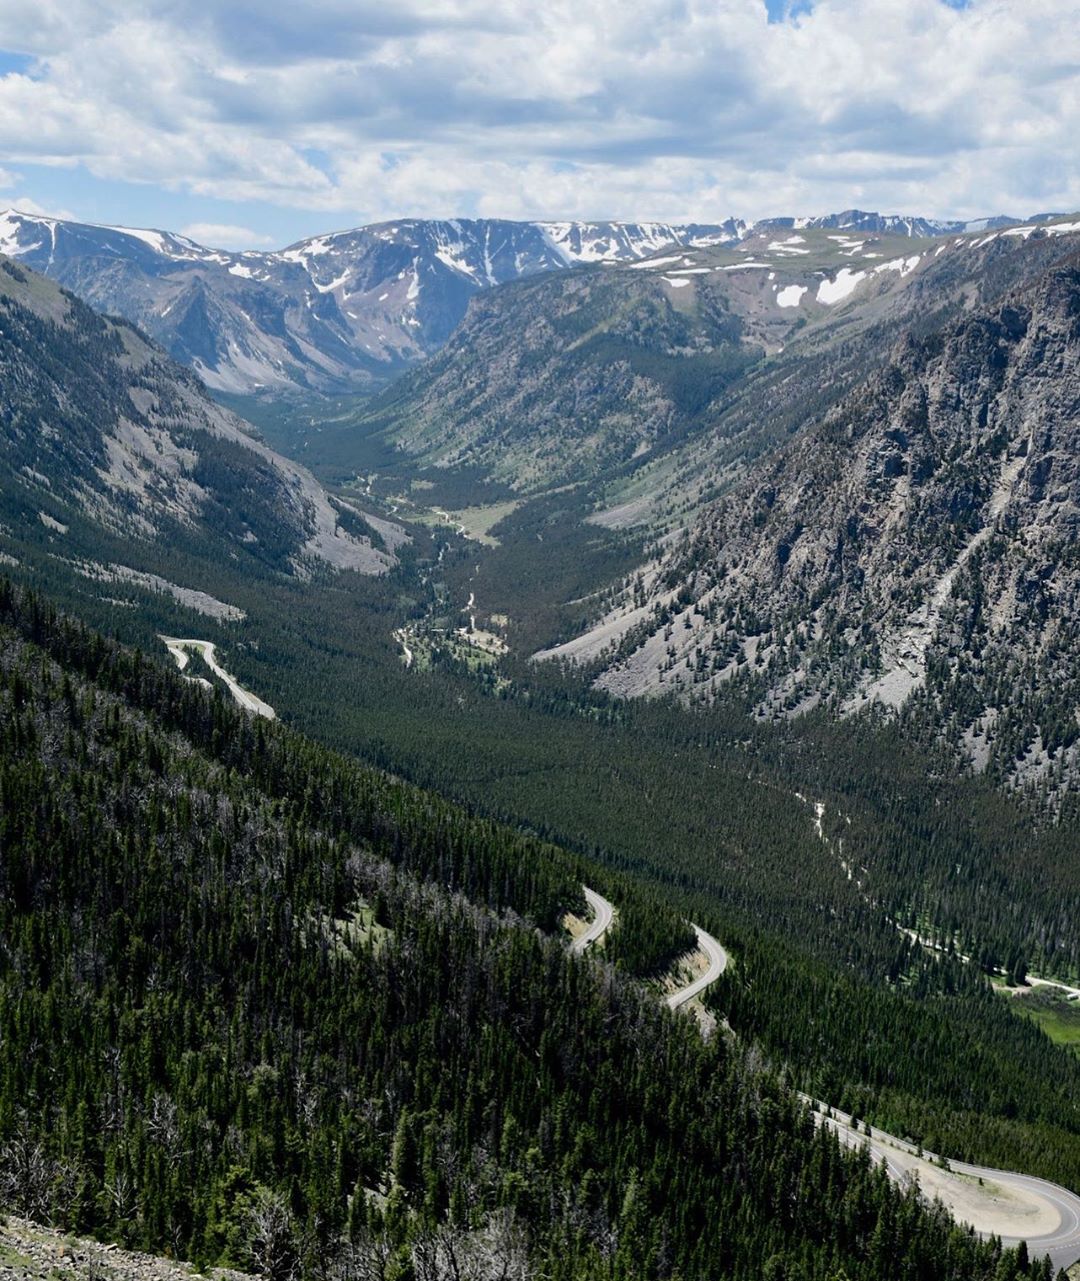 Spectacular views along Beartooth Highway! I have wanted to take this drive for …